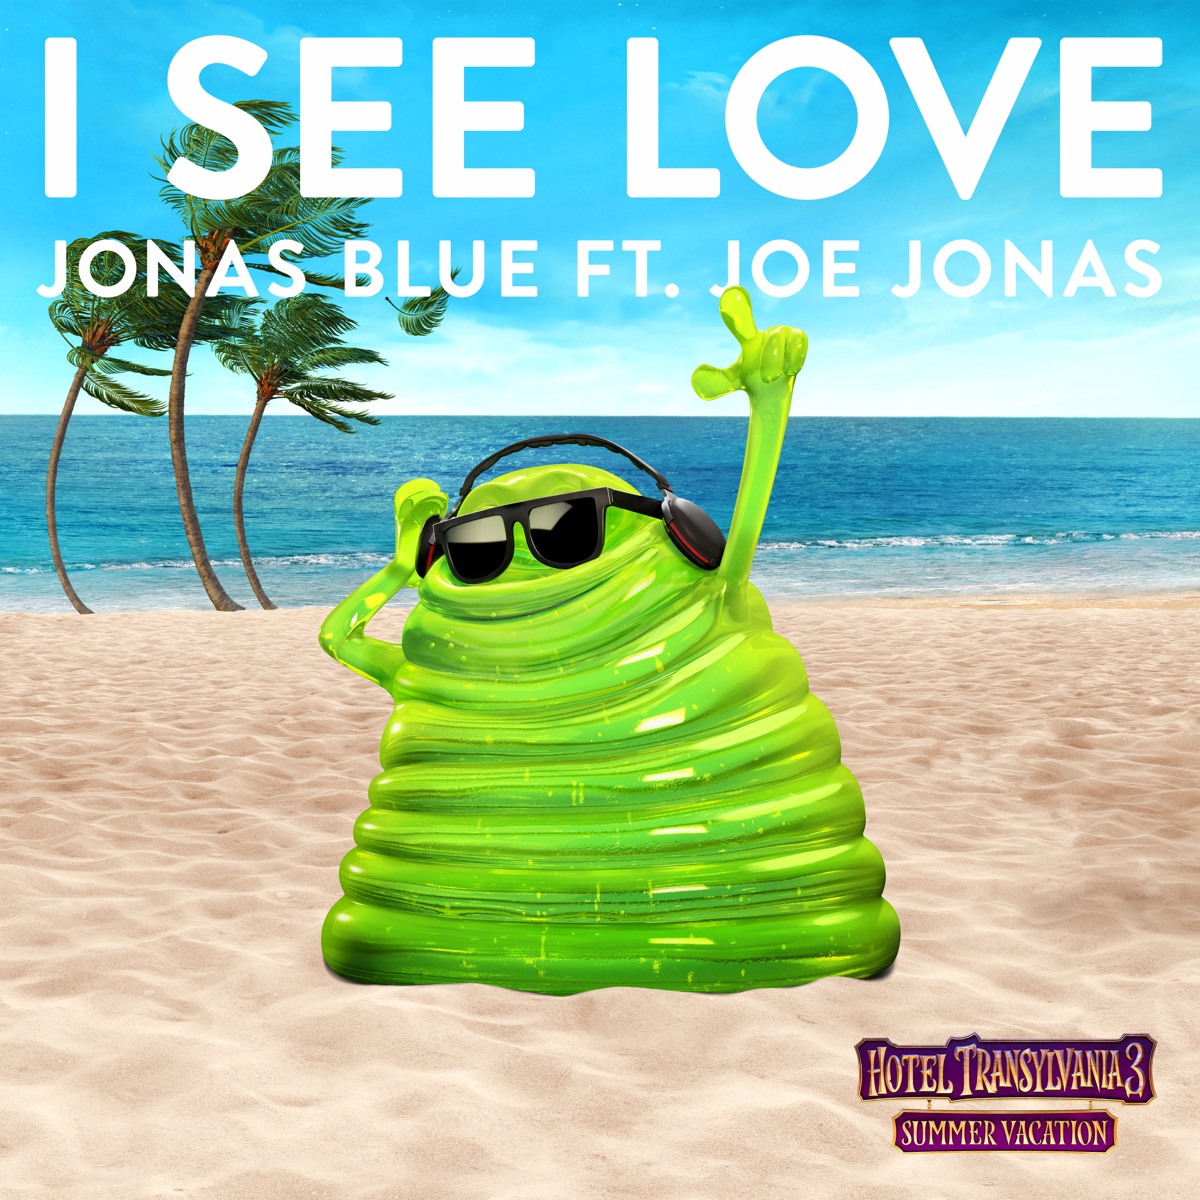 By Your Side (feat. RAYE) - Single by Jonas Blue on Apple Music